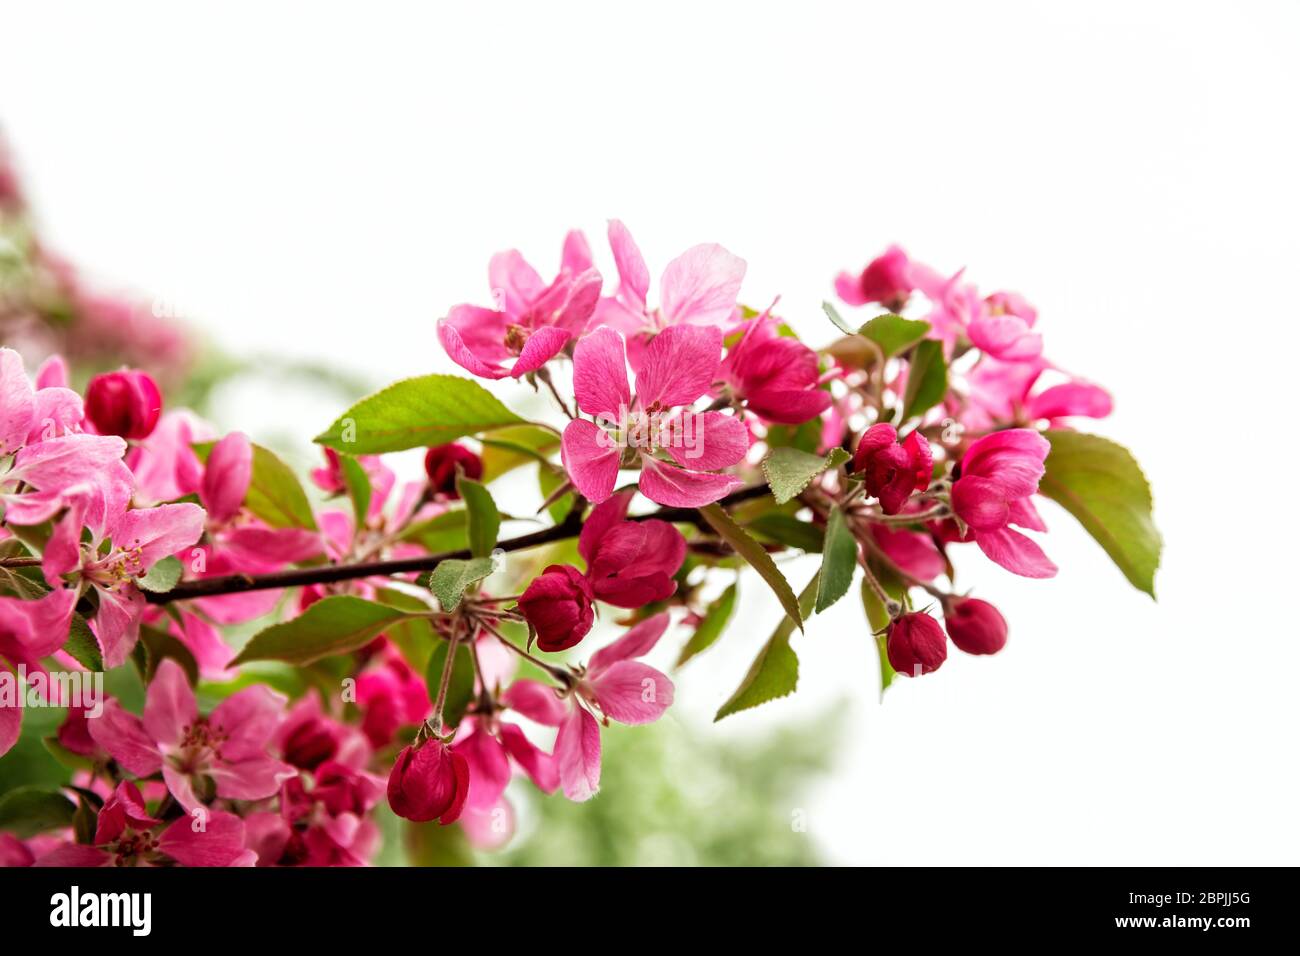 Branch of decorative apple tree with red flowers and buds Stock Photo